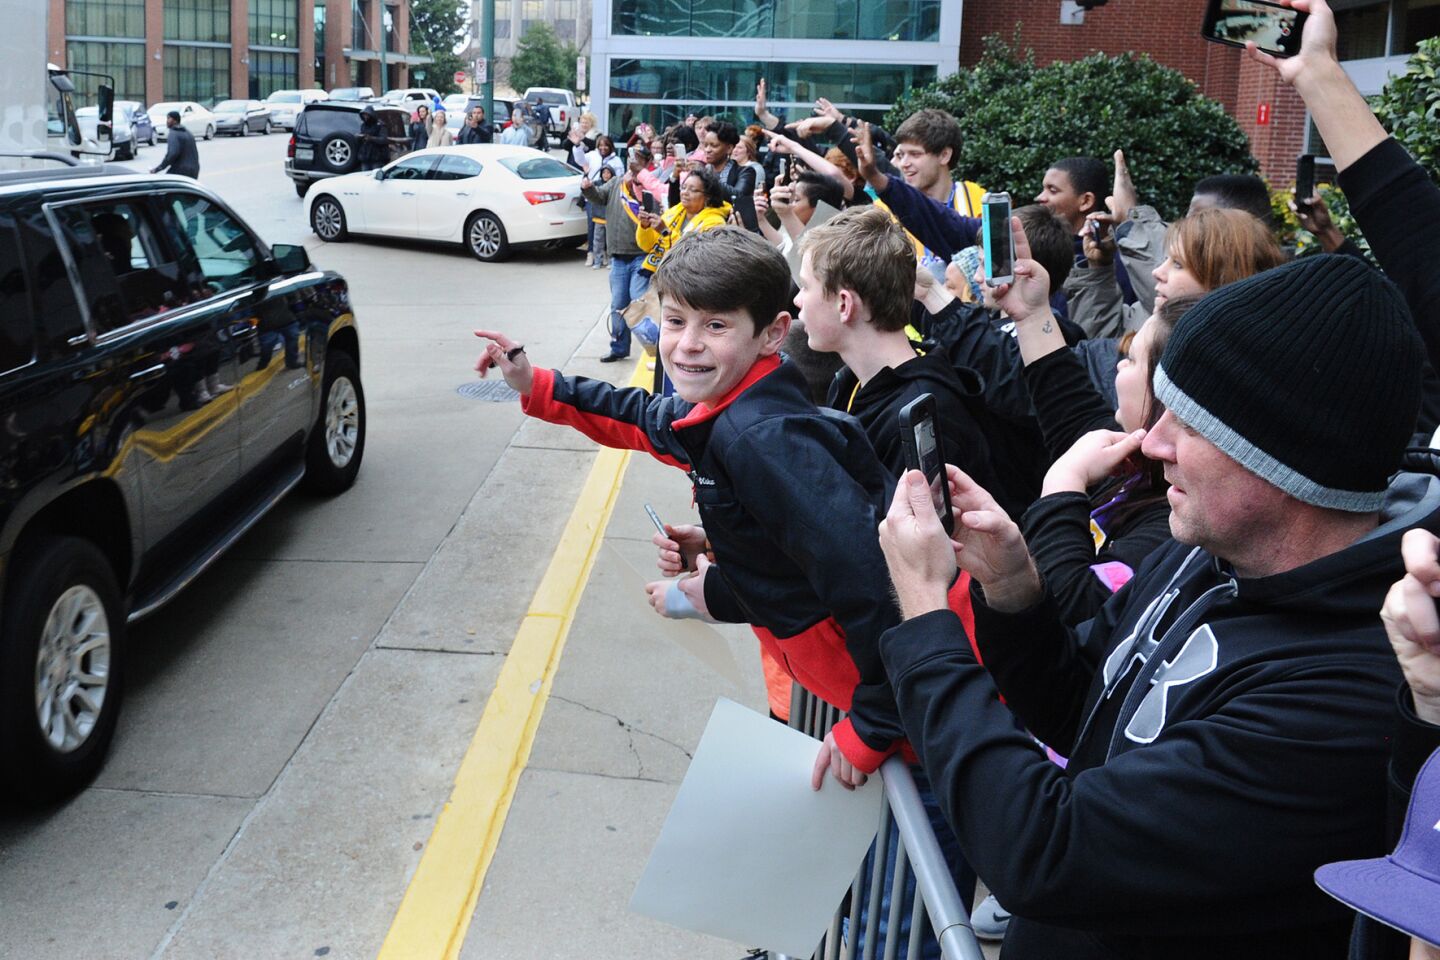 A crowd cheers as Lakers star Kobe Bryant leaves the Westin Hotel in Memphis, Tenn., in a personal vehicle to head to the arena for a game against the Grizzlies on Feb. 24, 2016.